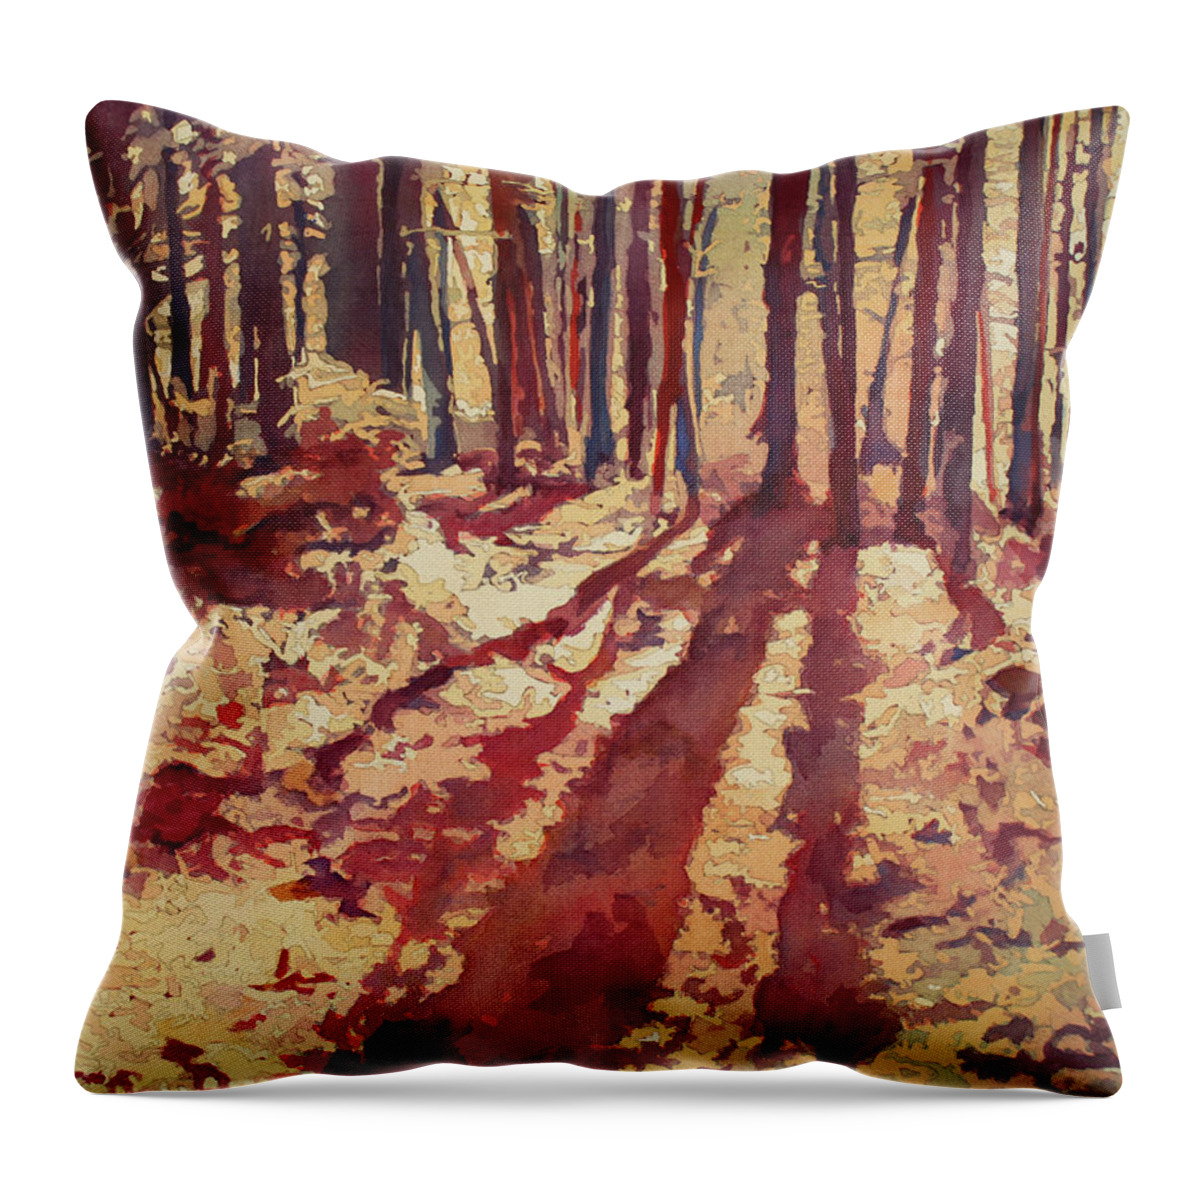 Wood Throw Pillow featuring the painting Wood's Edge by Jenny Armitage